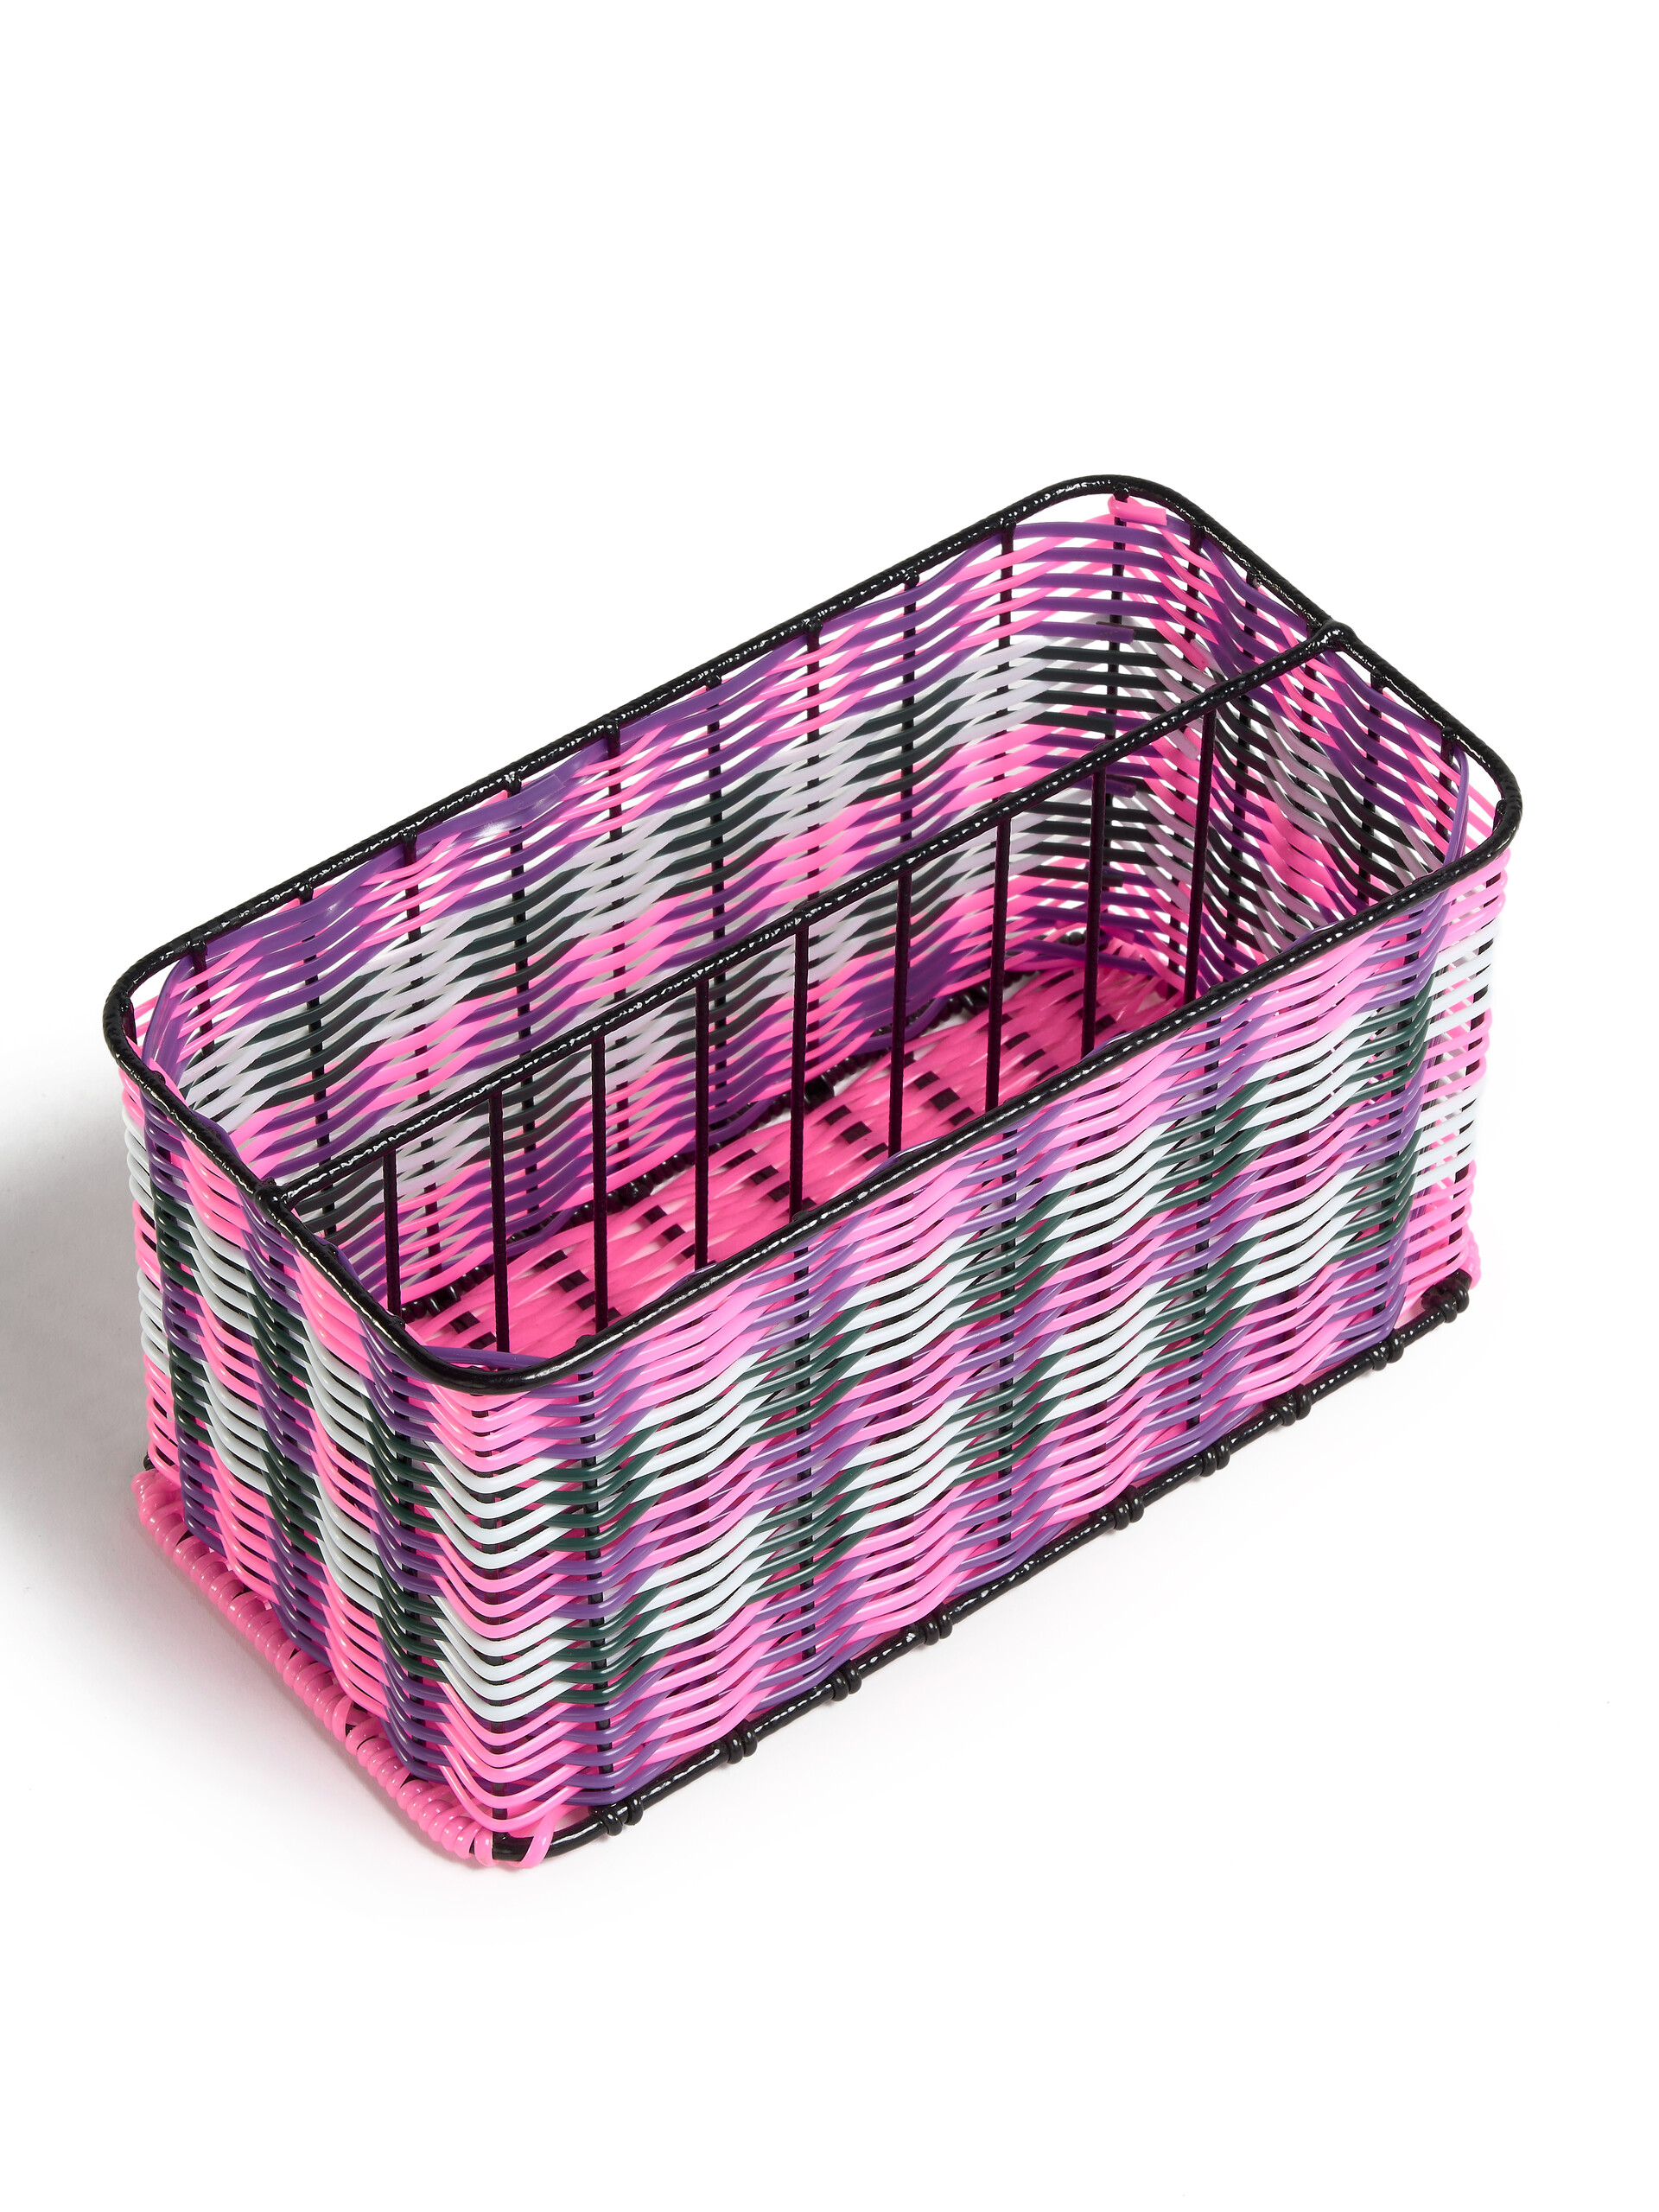 Pink MARNI MARKET woven cable cutlery basket - Accessories - Image 3